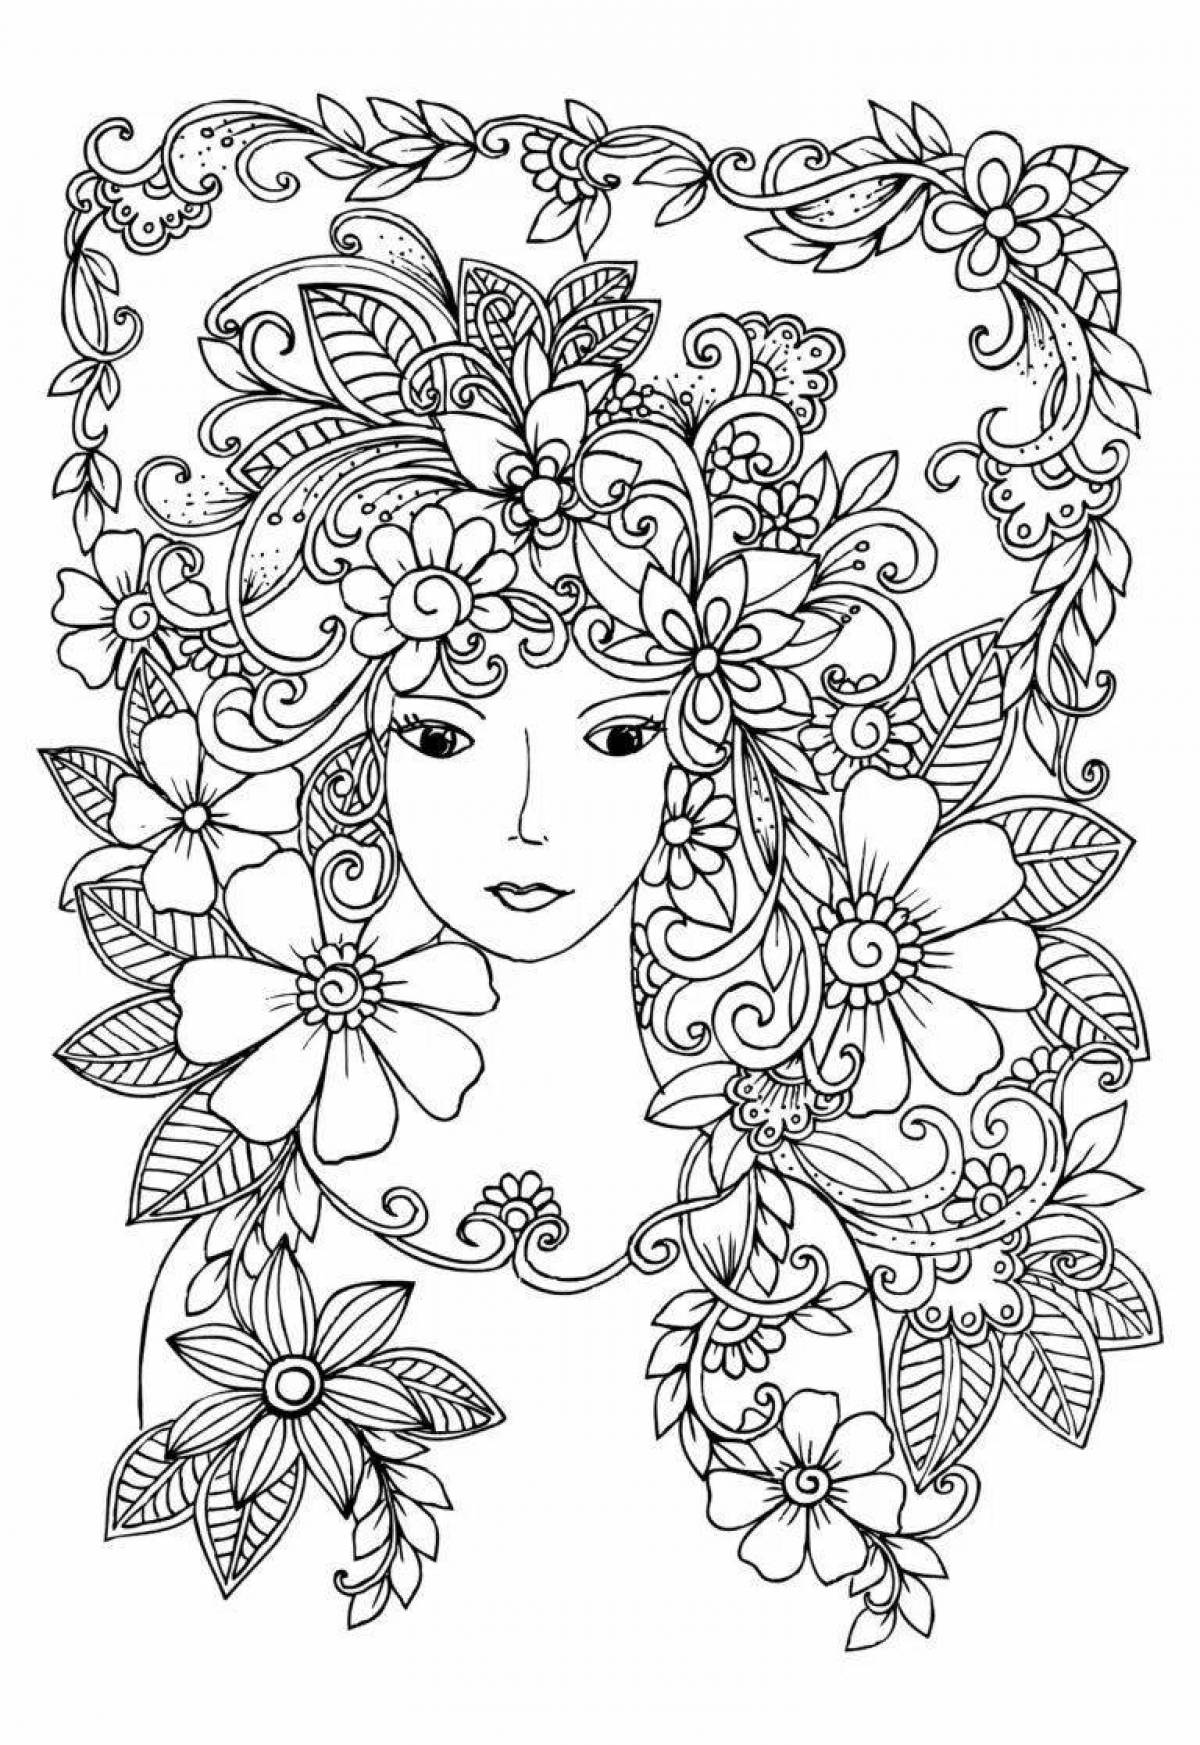 Fun coloring for 10 years for girls antistress